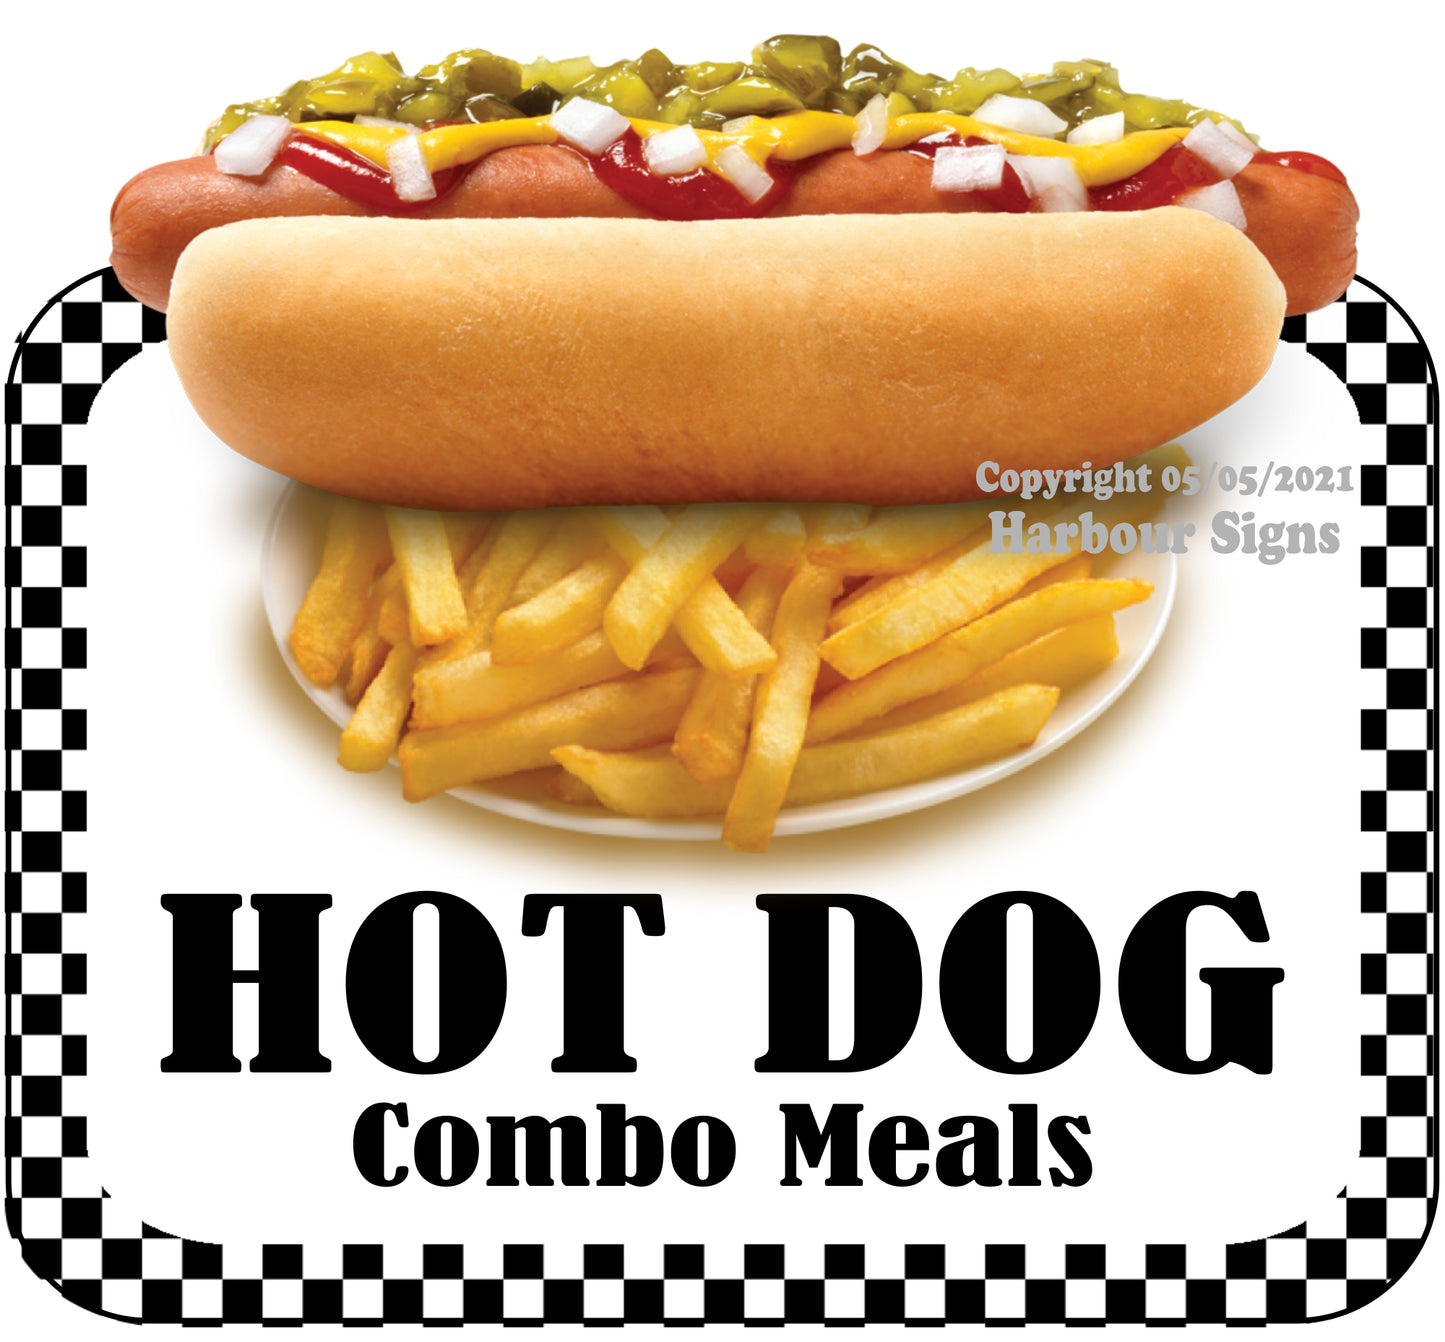 Hot Dog Combo Meals Decal Food Truck Concession Vinyl Sticker bw